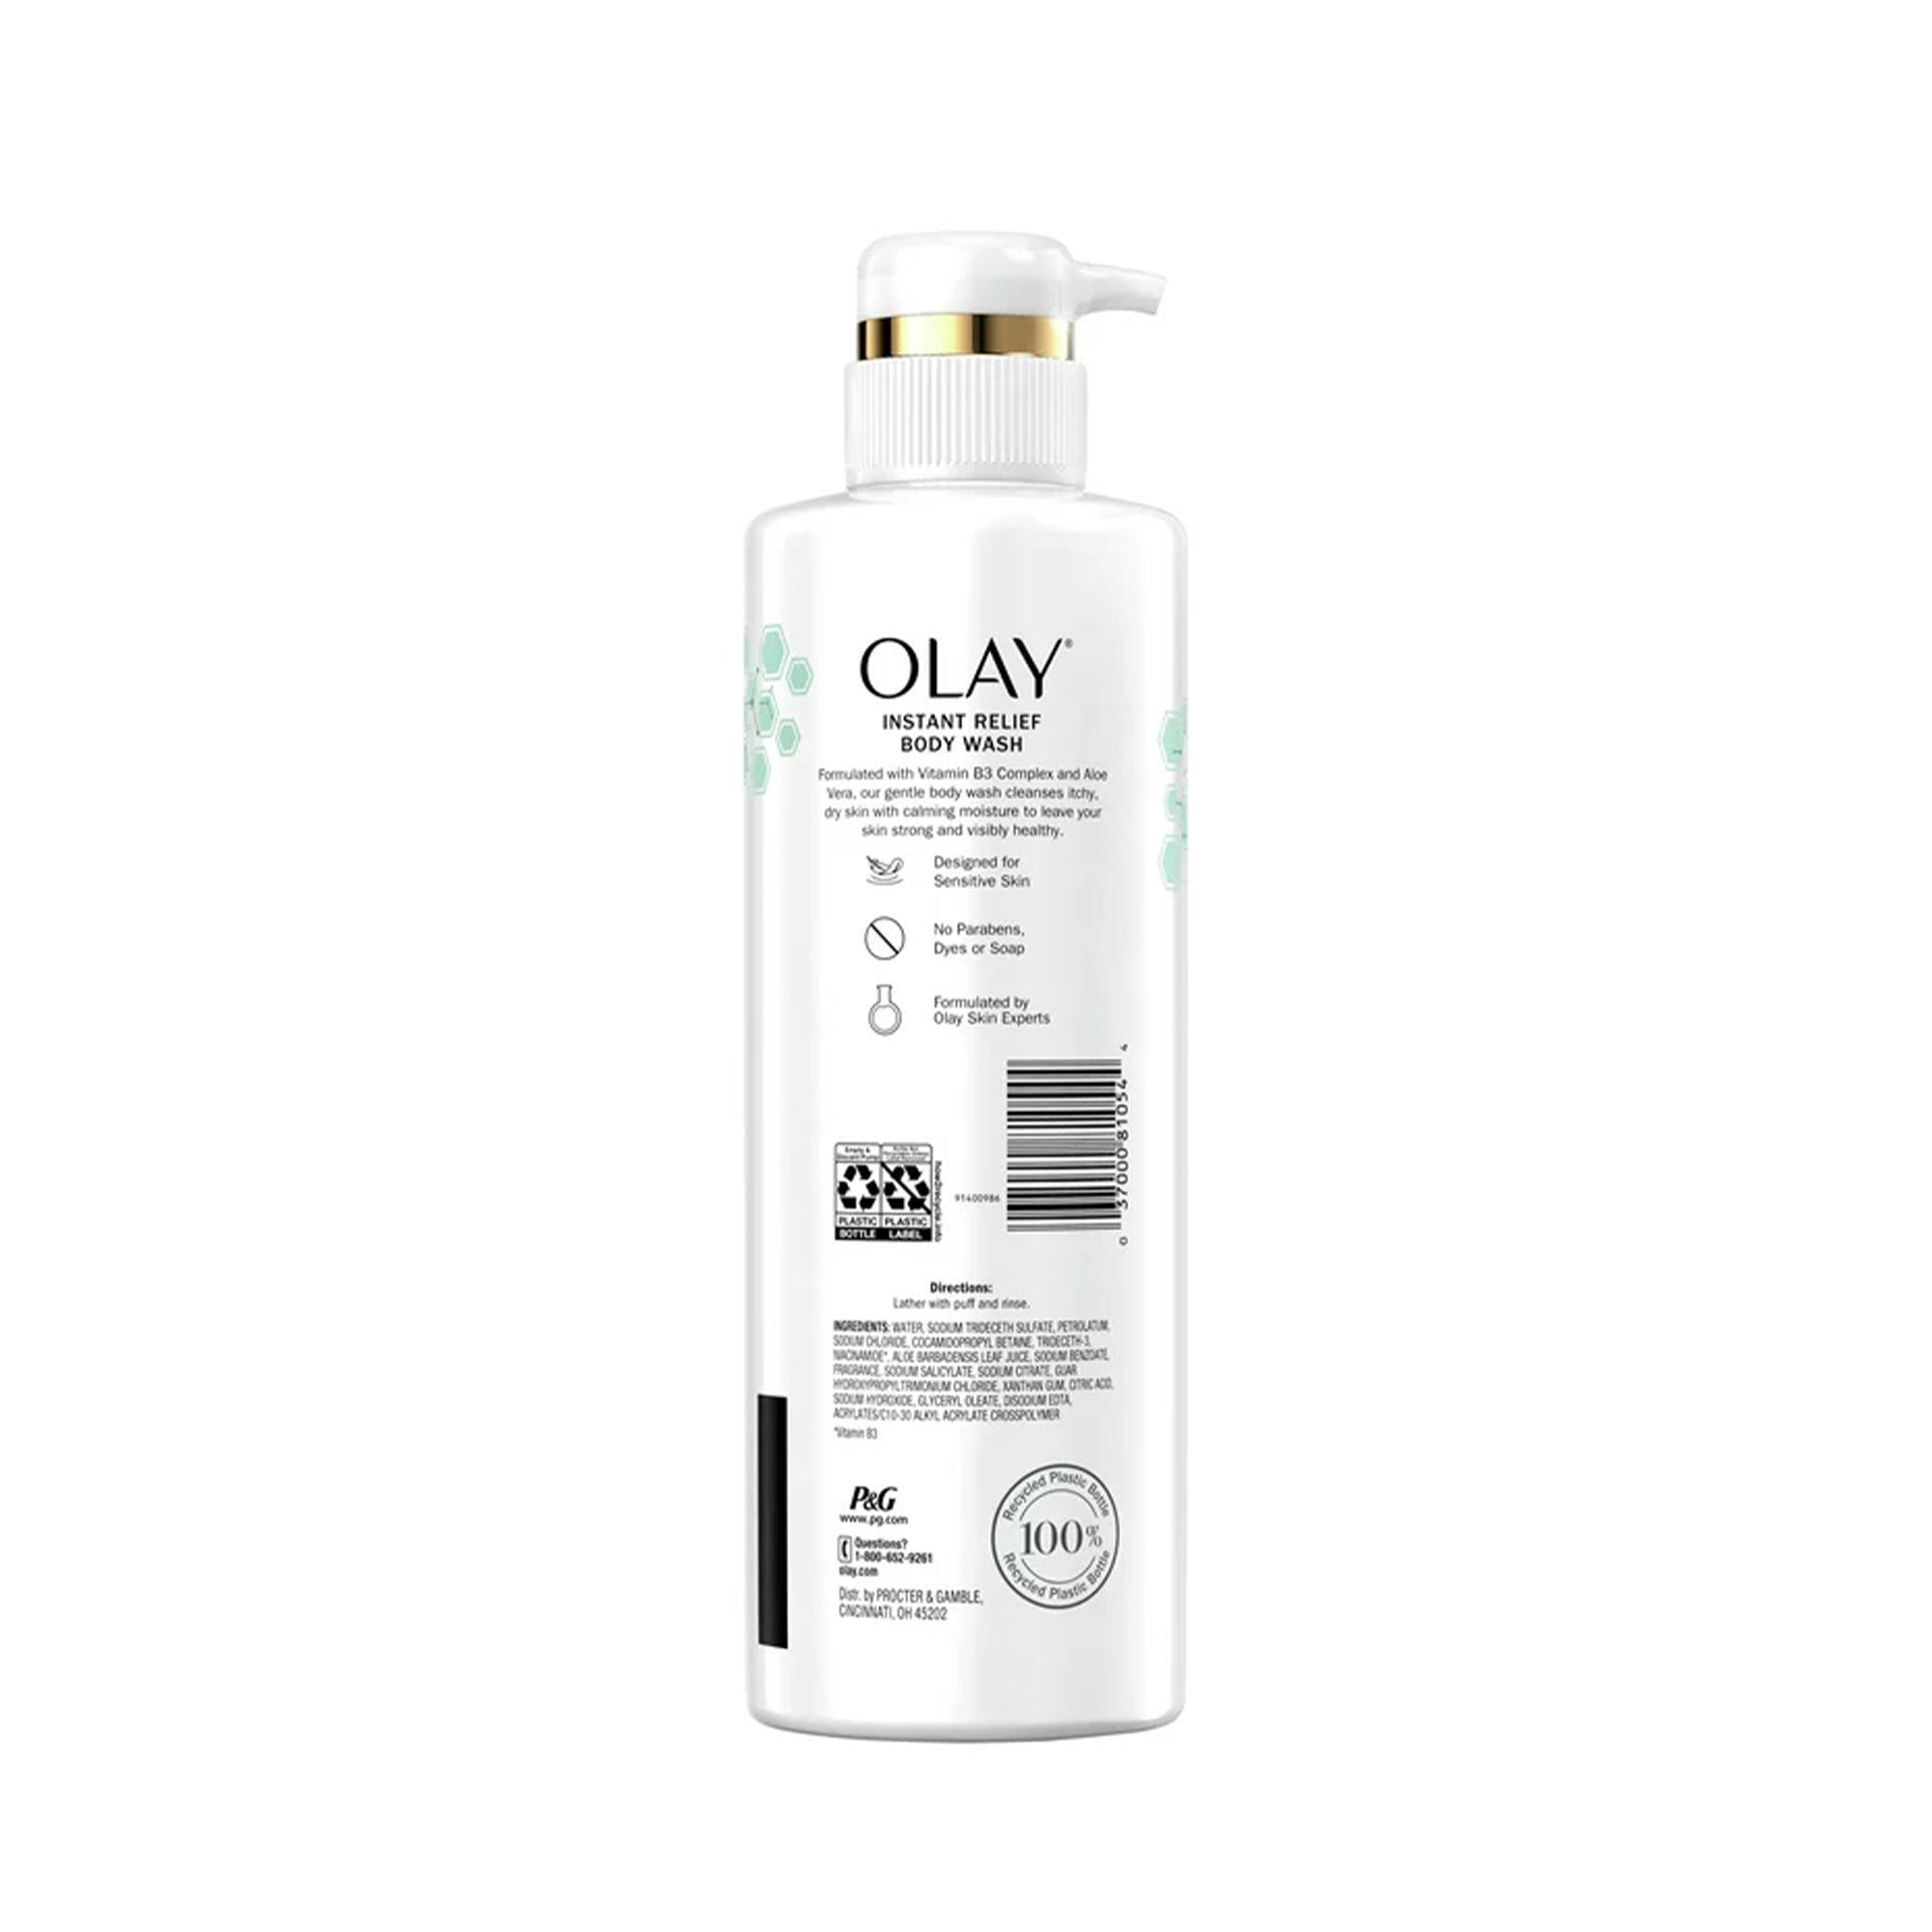 Olay Instant Relief Body Wash